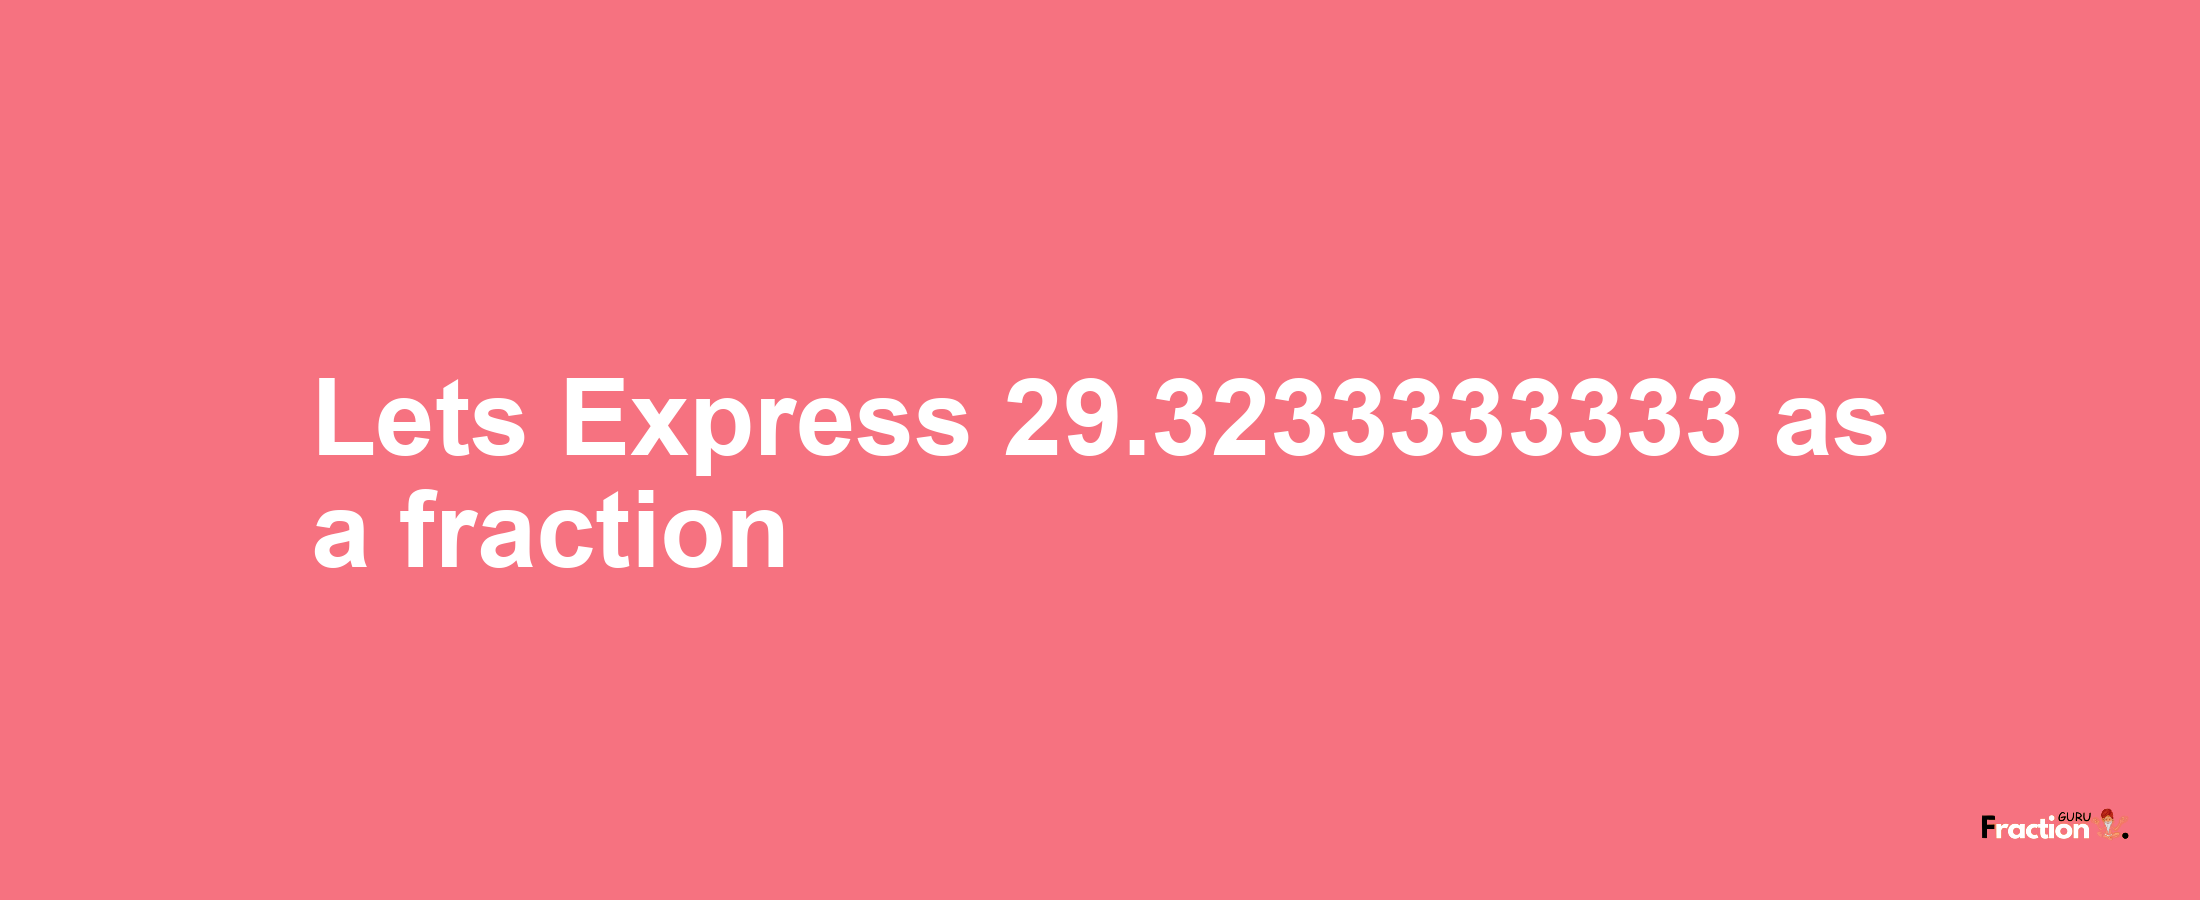 Lets Express 29.3233333333 as afraction